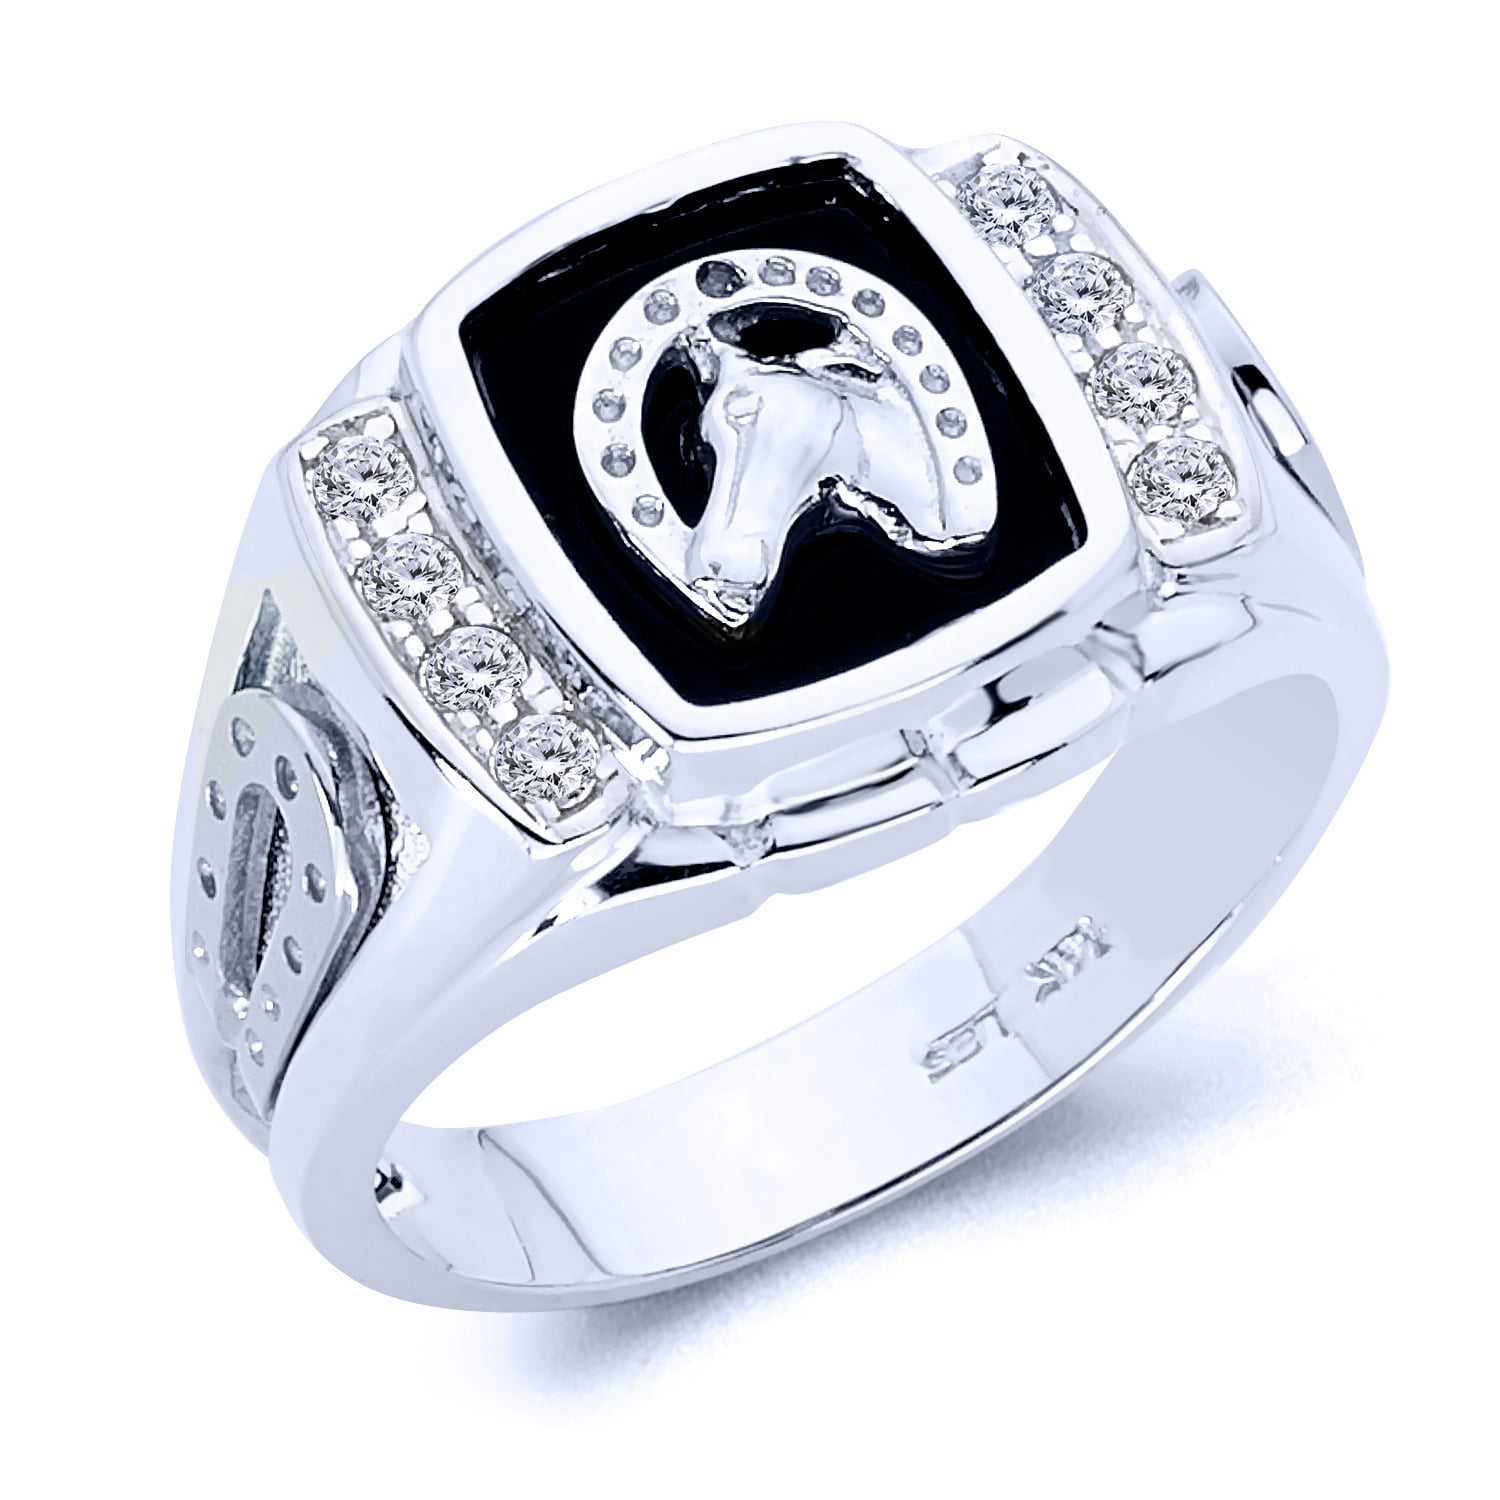 Wellingsale Mens 925 Sterling Silver CZ Cubic Zirconia Lucky Horseshoe Embossed Ring - Size 8